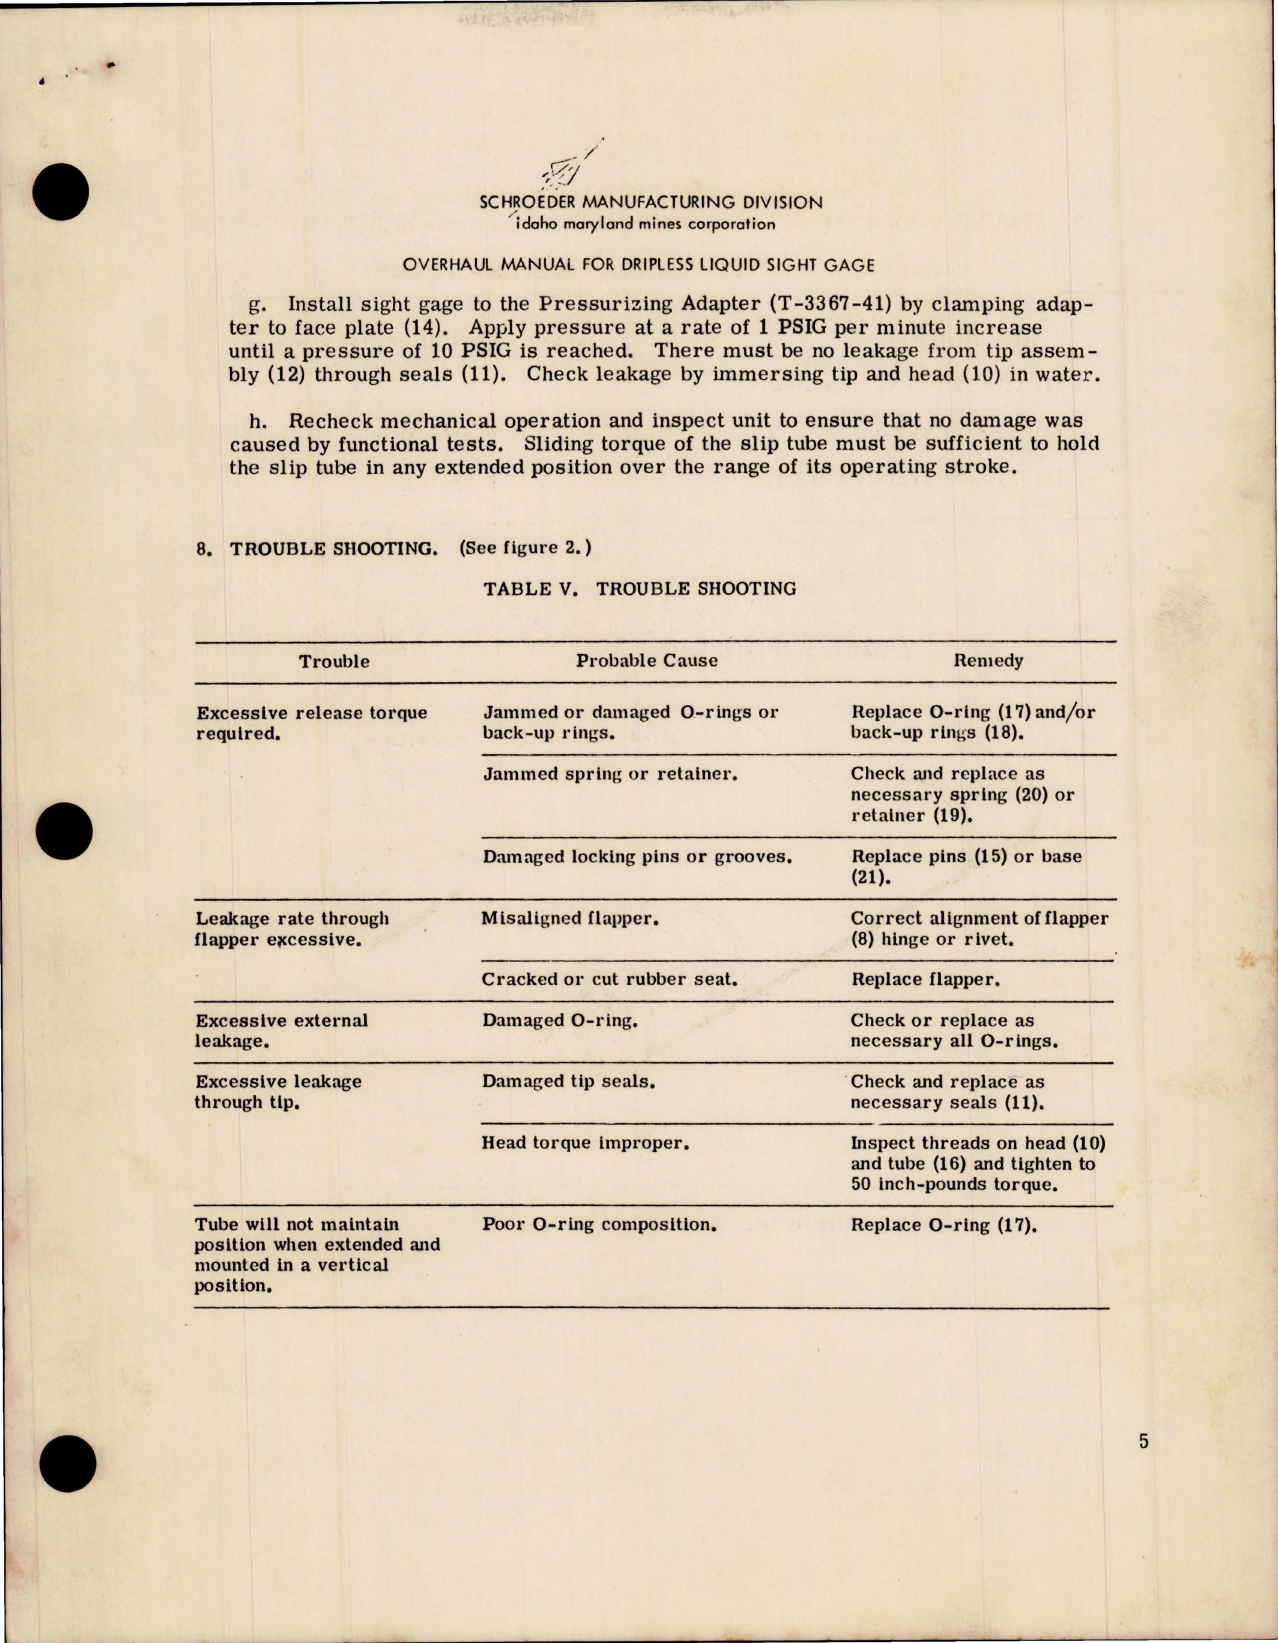 Sample page 7 from AirCorps Library document: Overhaul Instructions for Dripless Liquid Sight Gage 